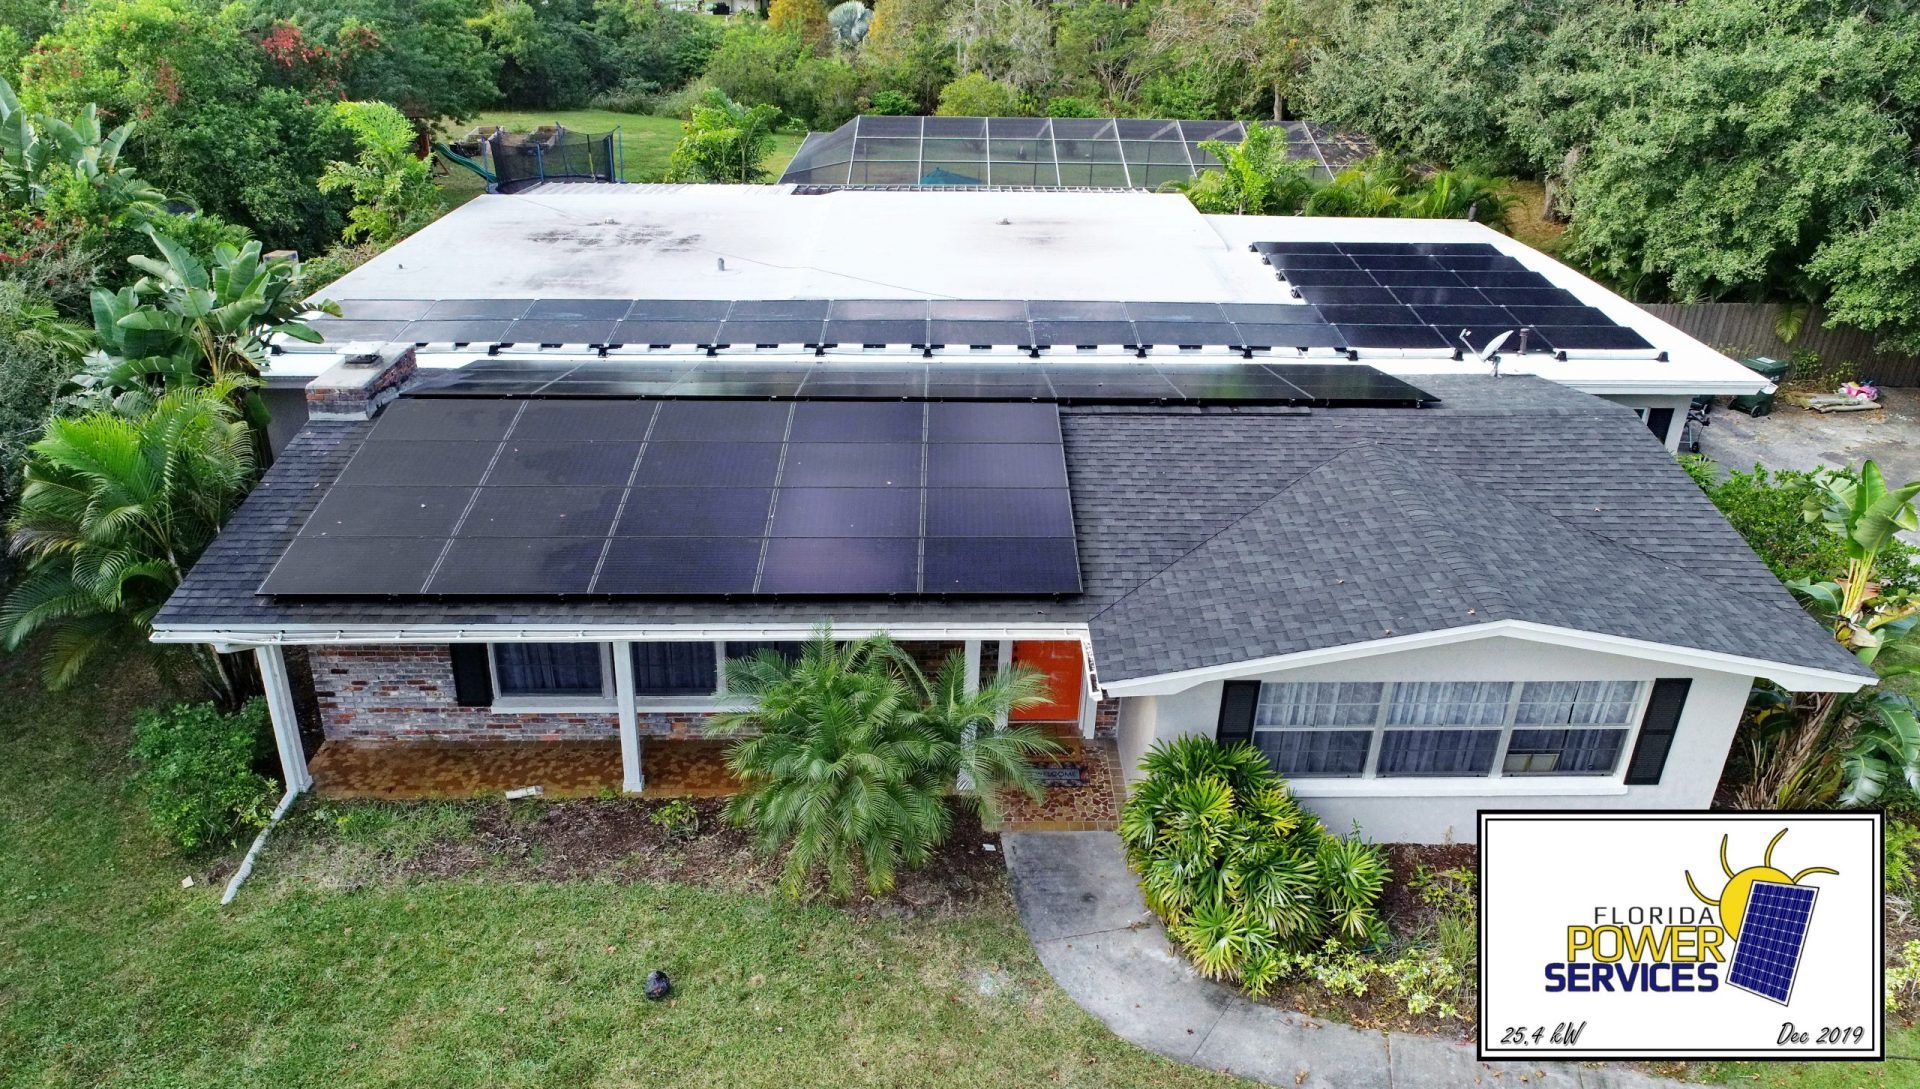 25.4 kW Clearwater Residential Solar Install